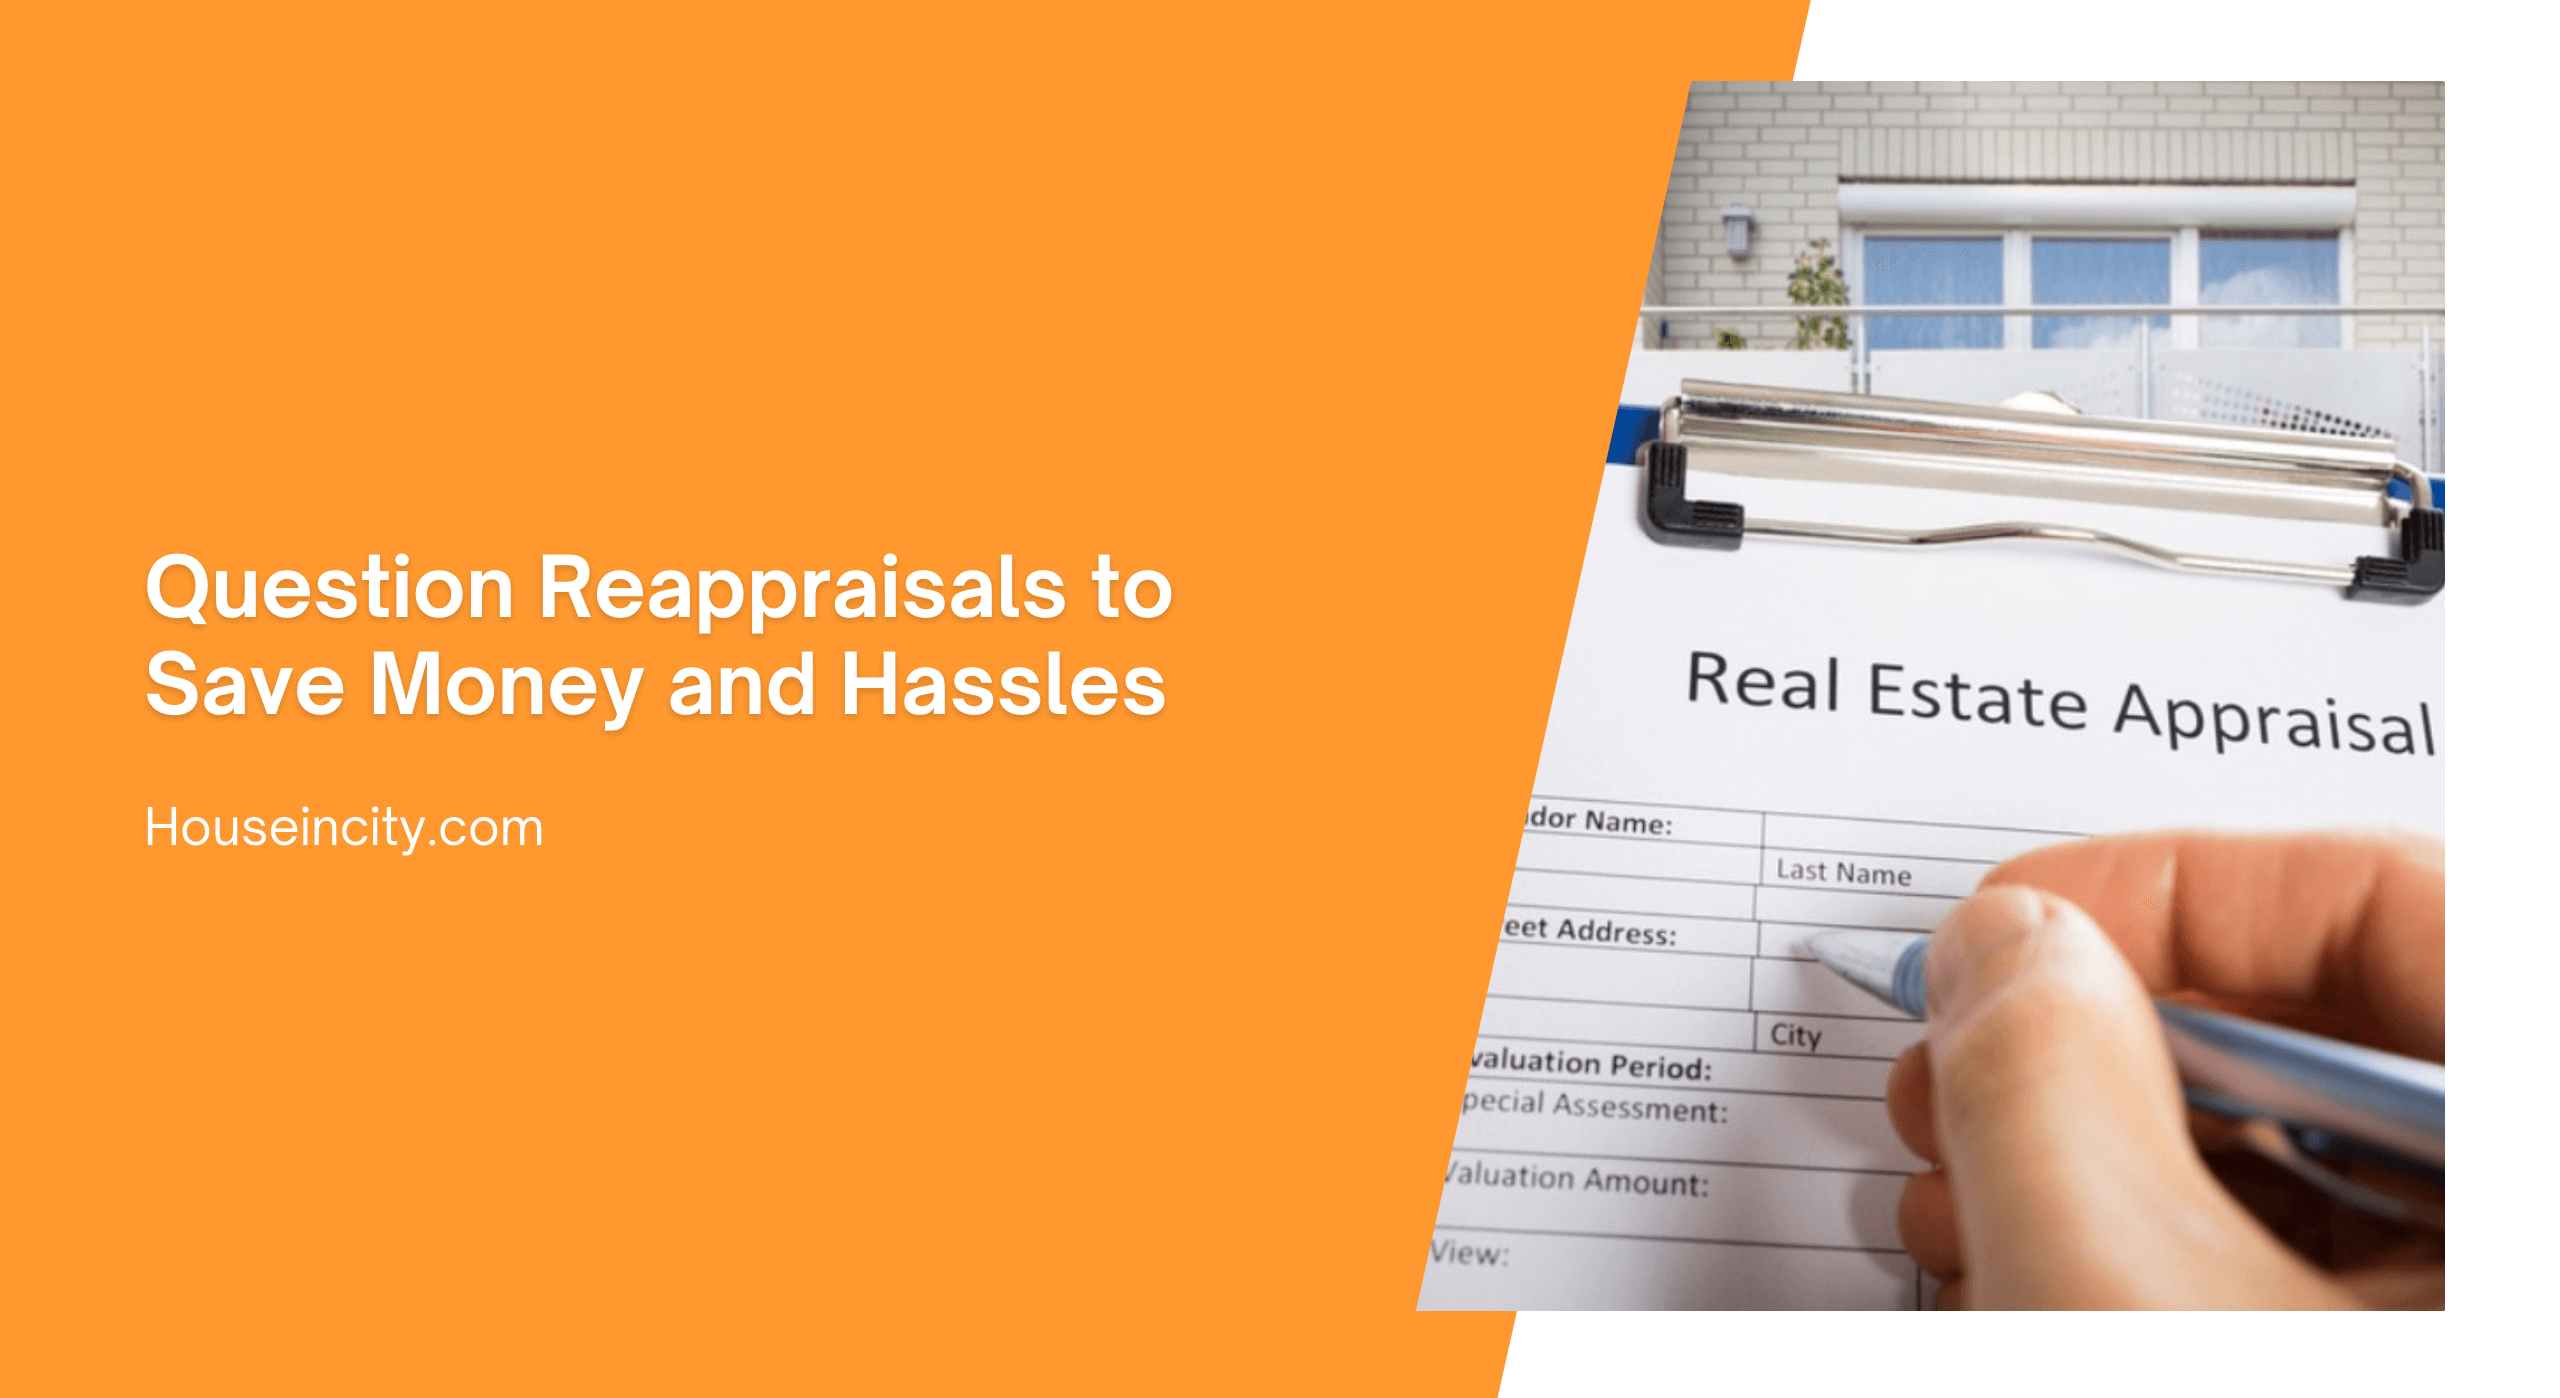 Question Reappraisals to Save Money and Hassles